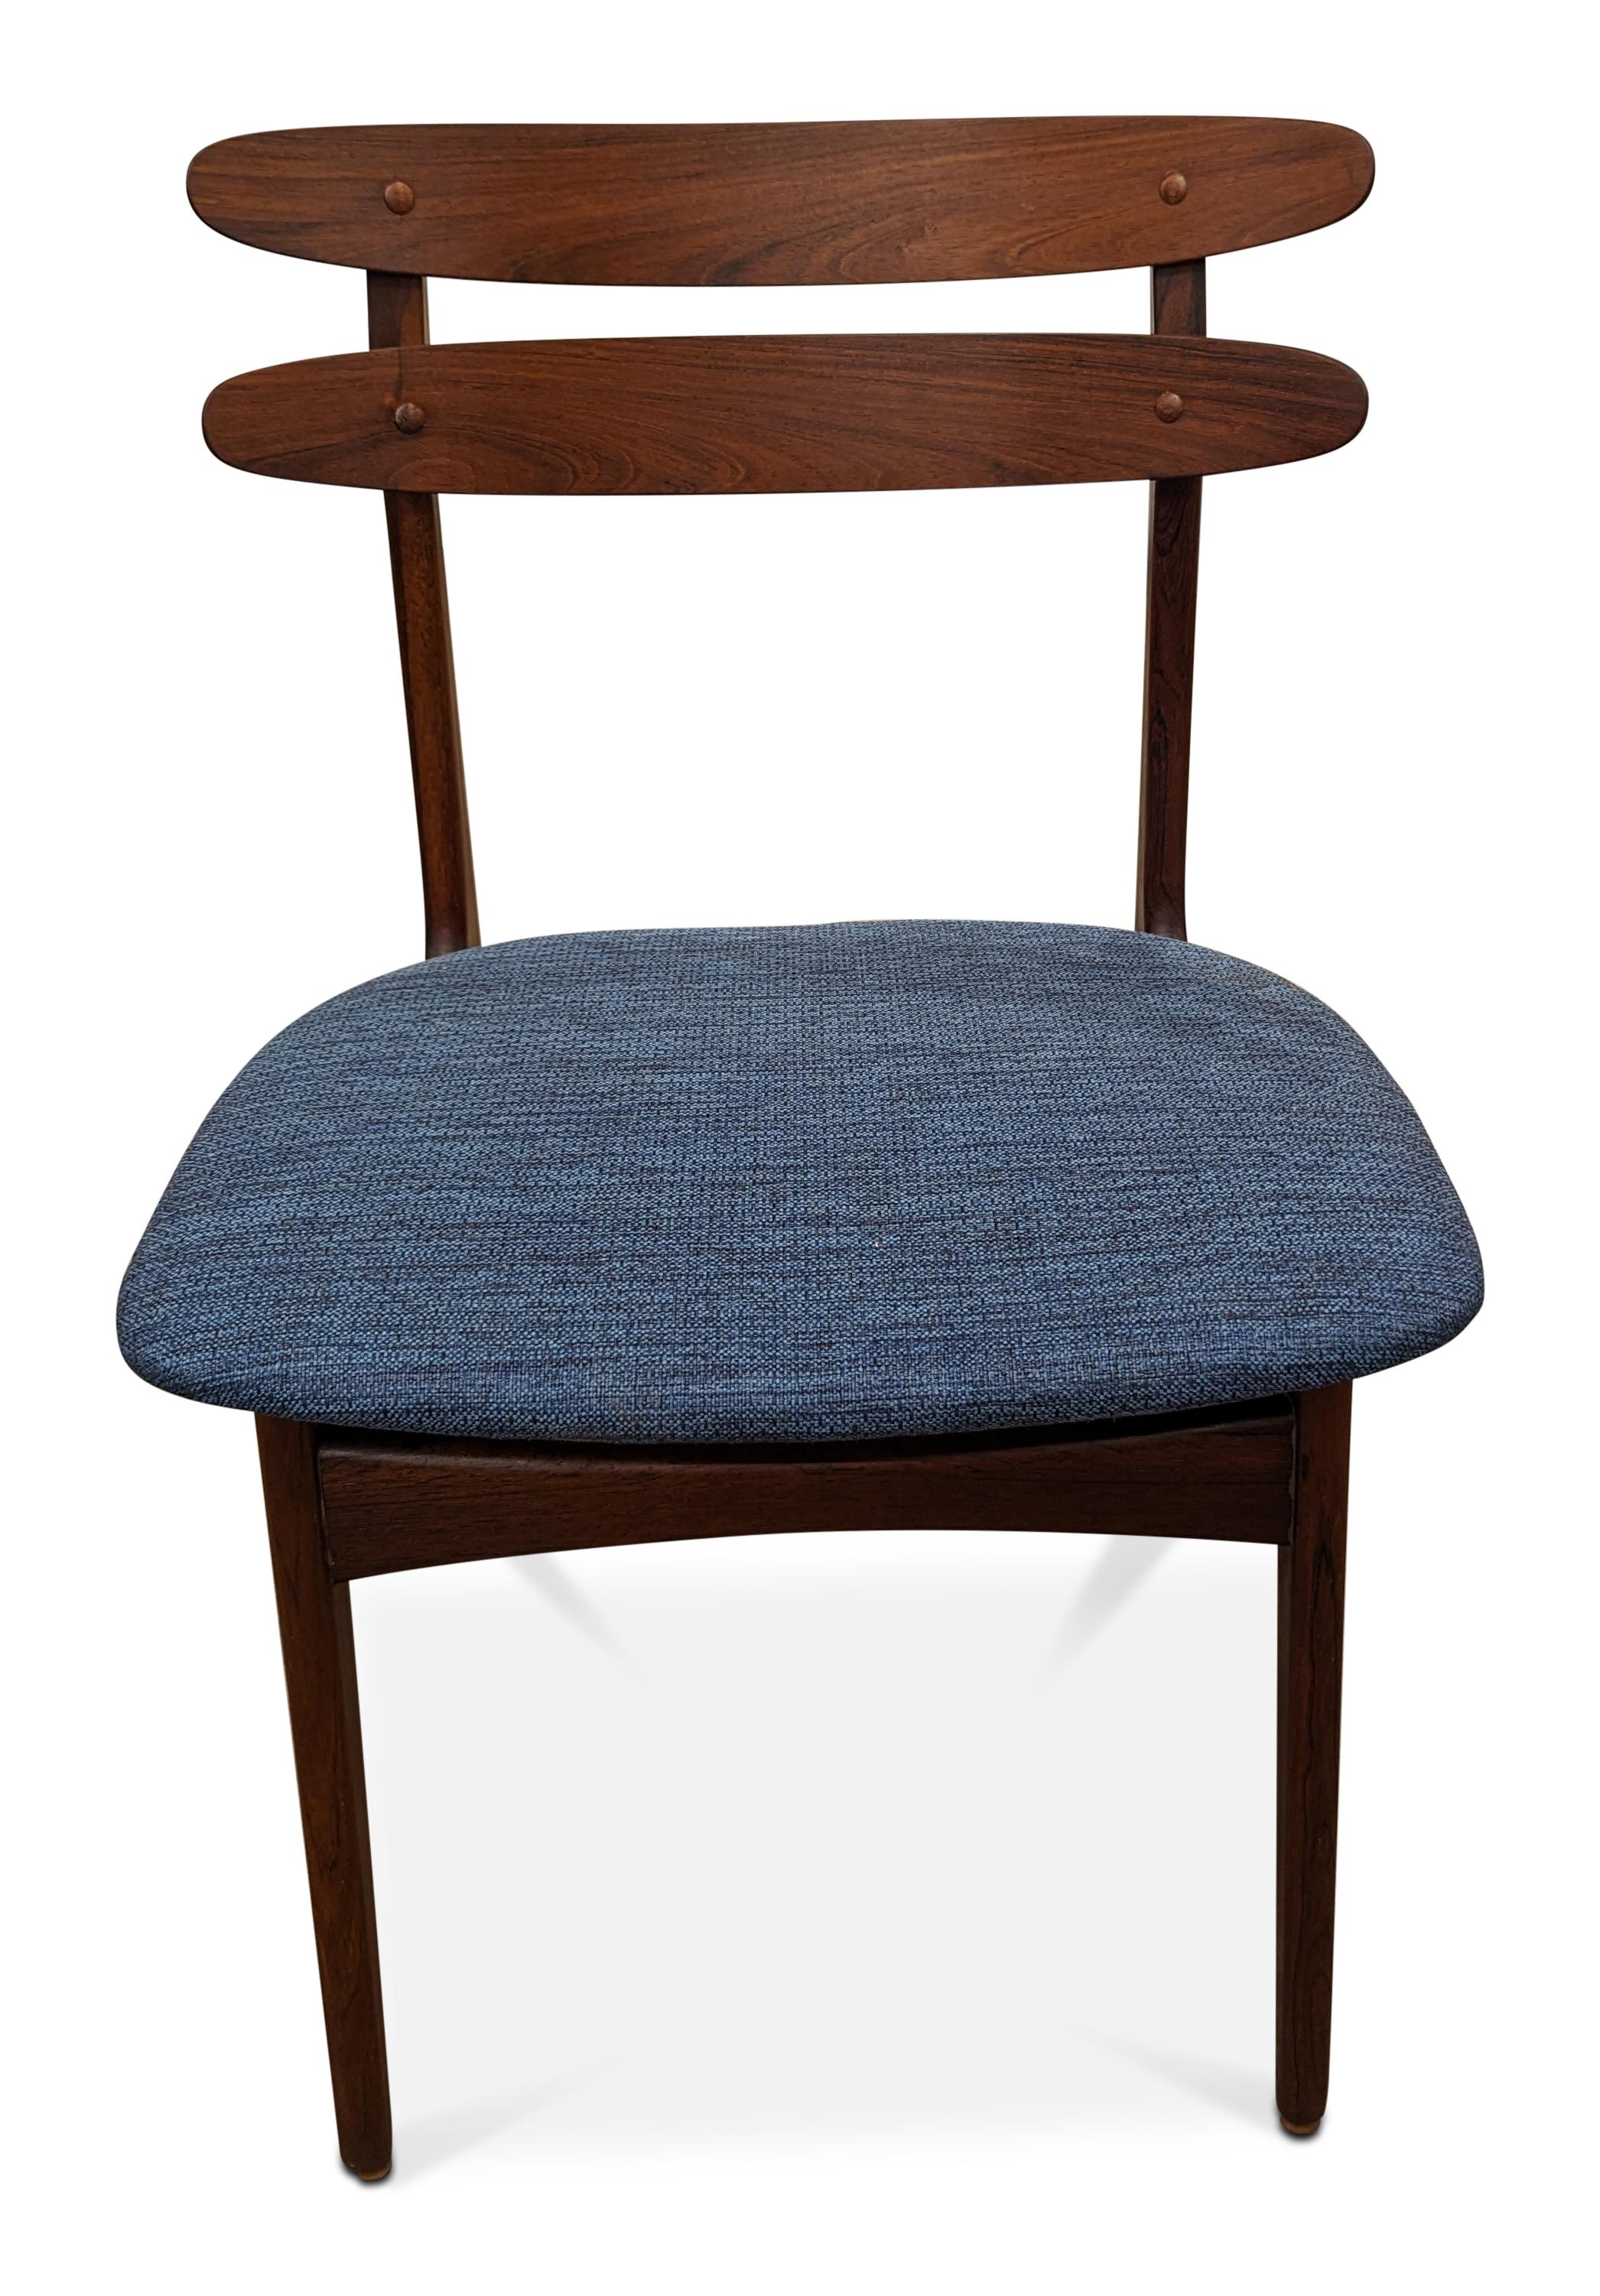 6 Rosewood Dining Chairs - 022483 Vintage Danish Mid Century 3